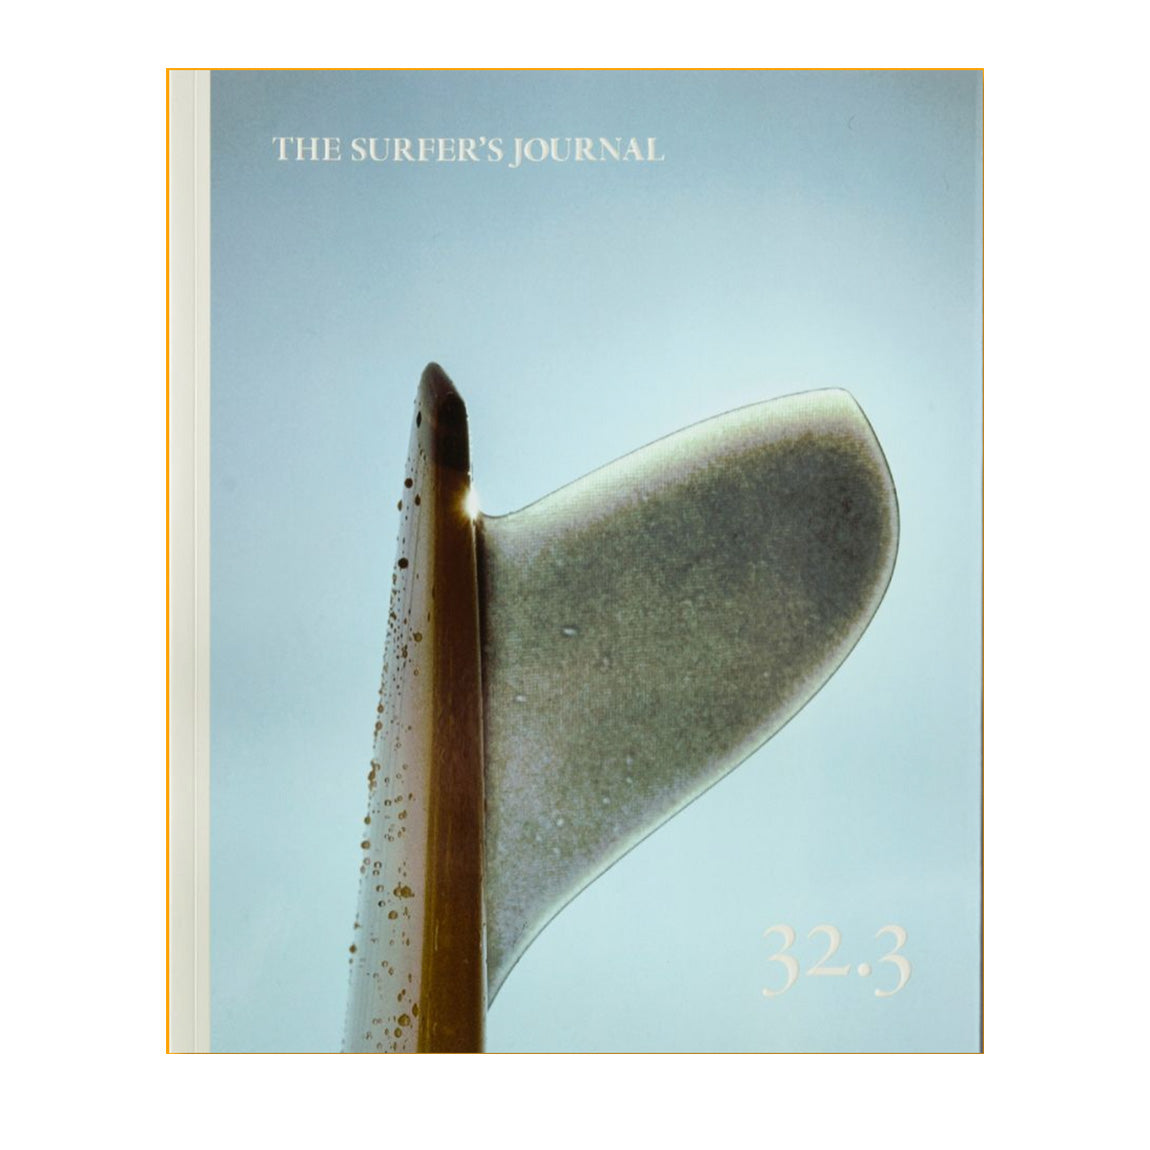 THE SURFER'S JOURNAL - ISSUE 32.3